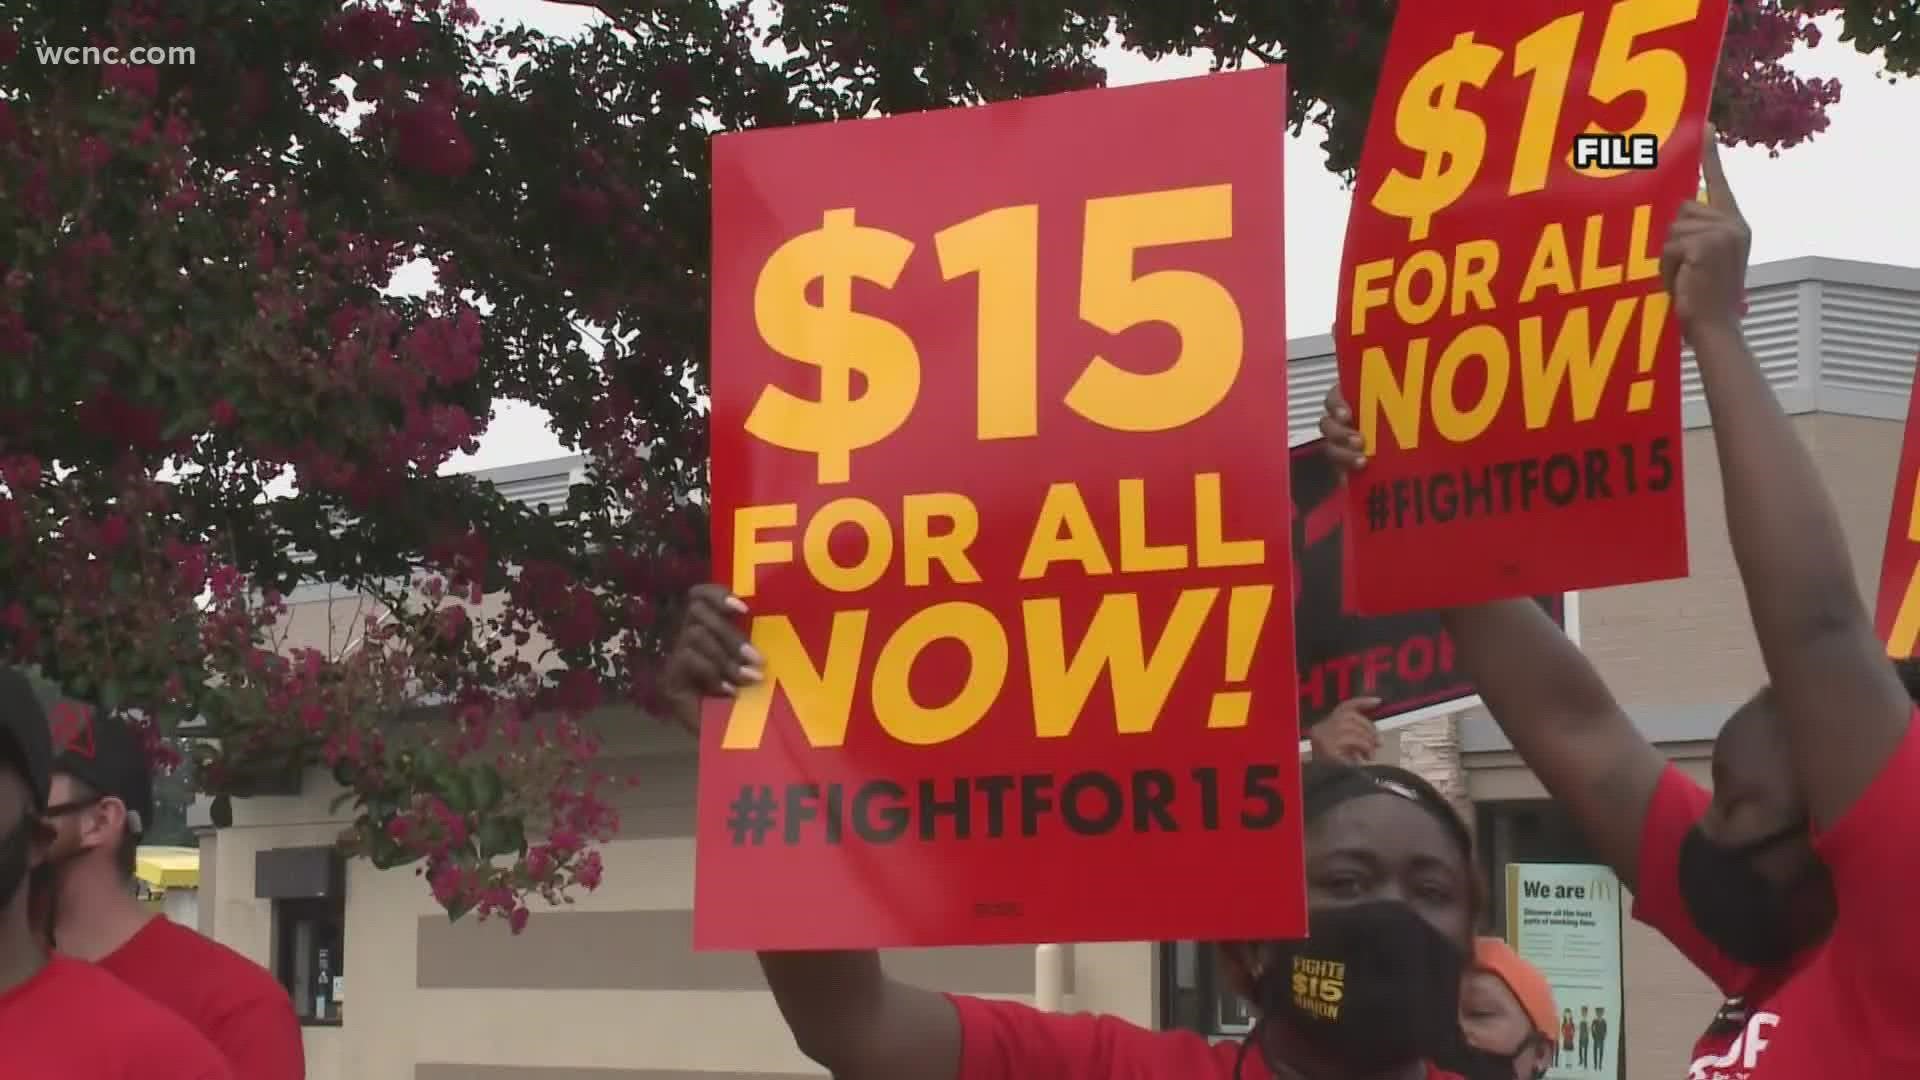 Fed up with low wages and abuse at work, fast food employees nationwide are staging #Striketober walkouts this month.